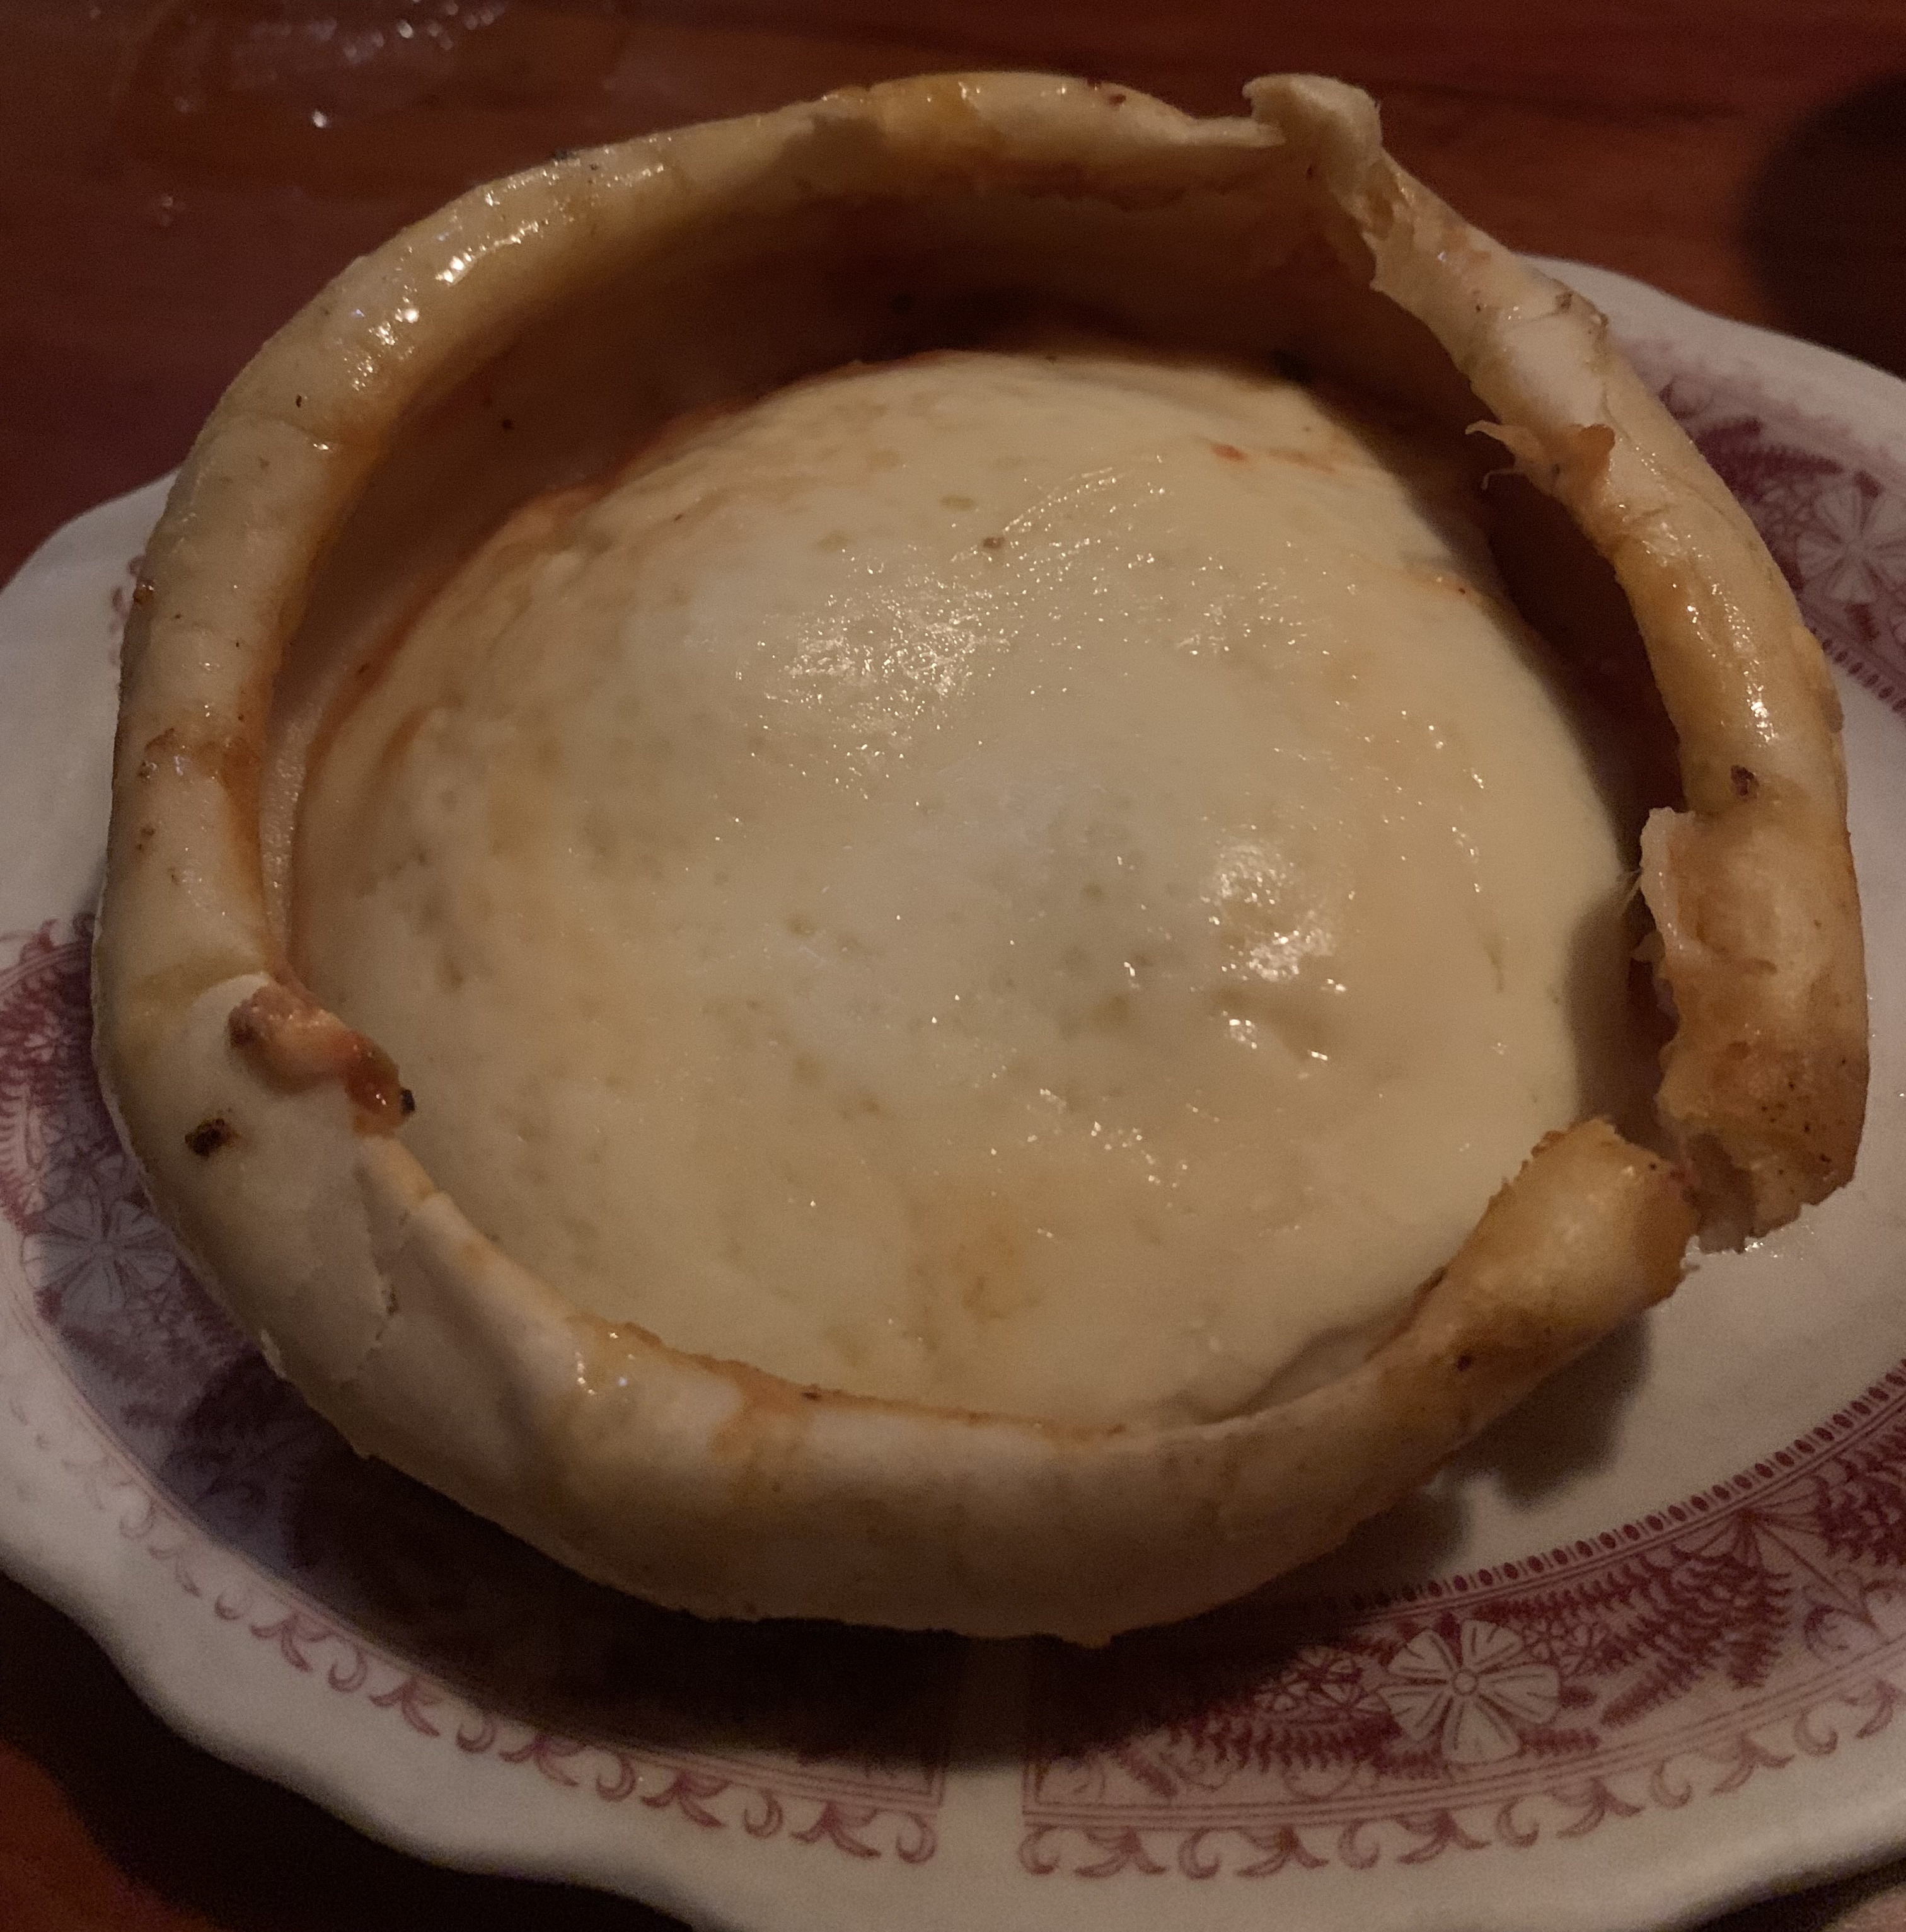 Personal-sized deep-dish style pizza: a smooth, pale bread dough filled with a dome of mozzarella. No toppings or tomato sauce are visible.